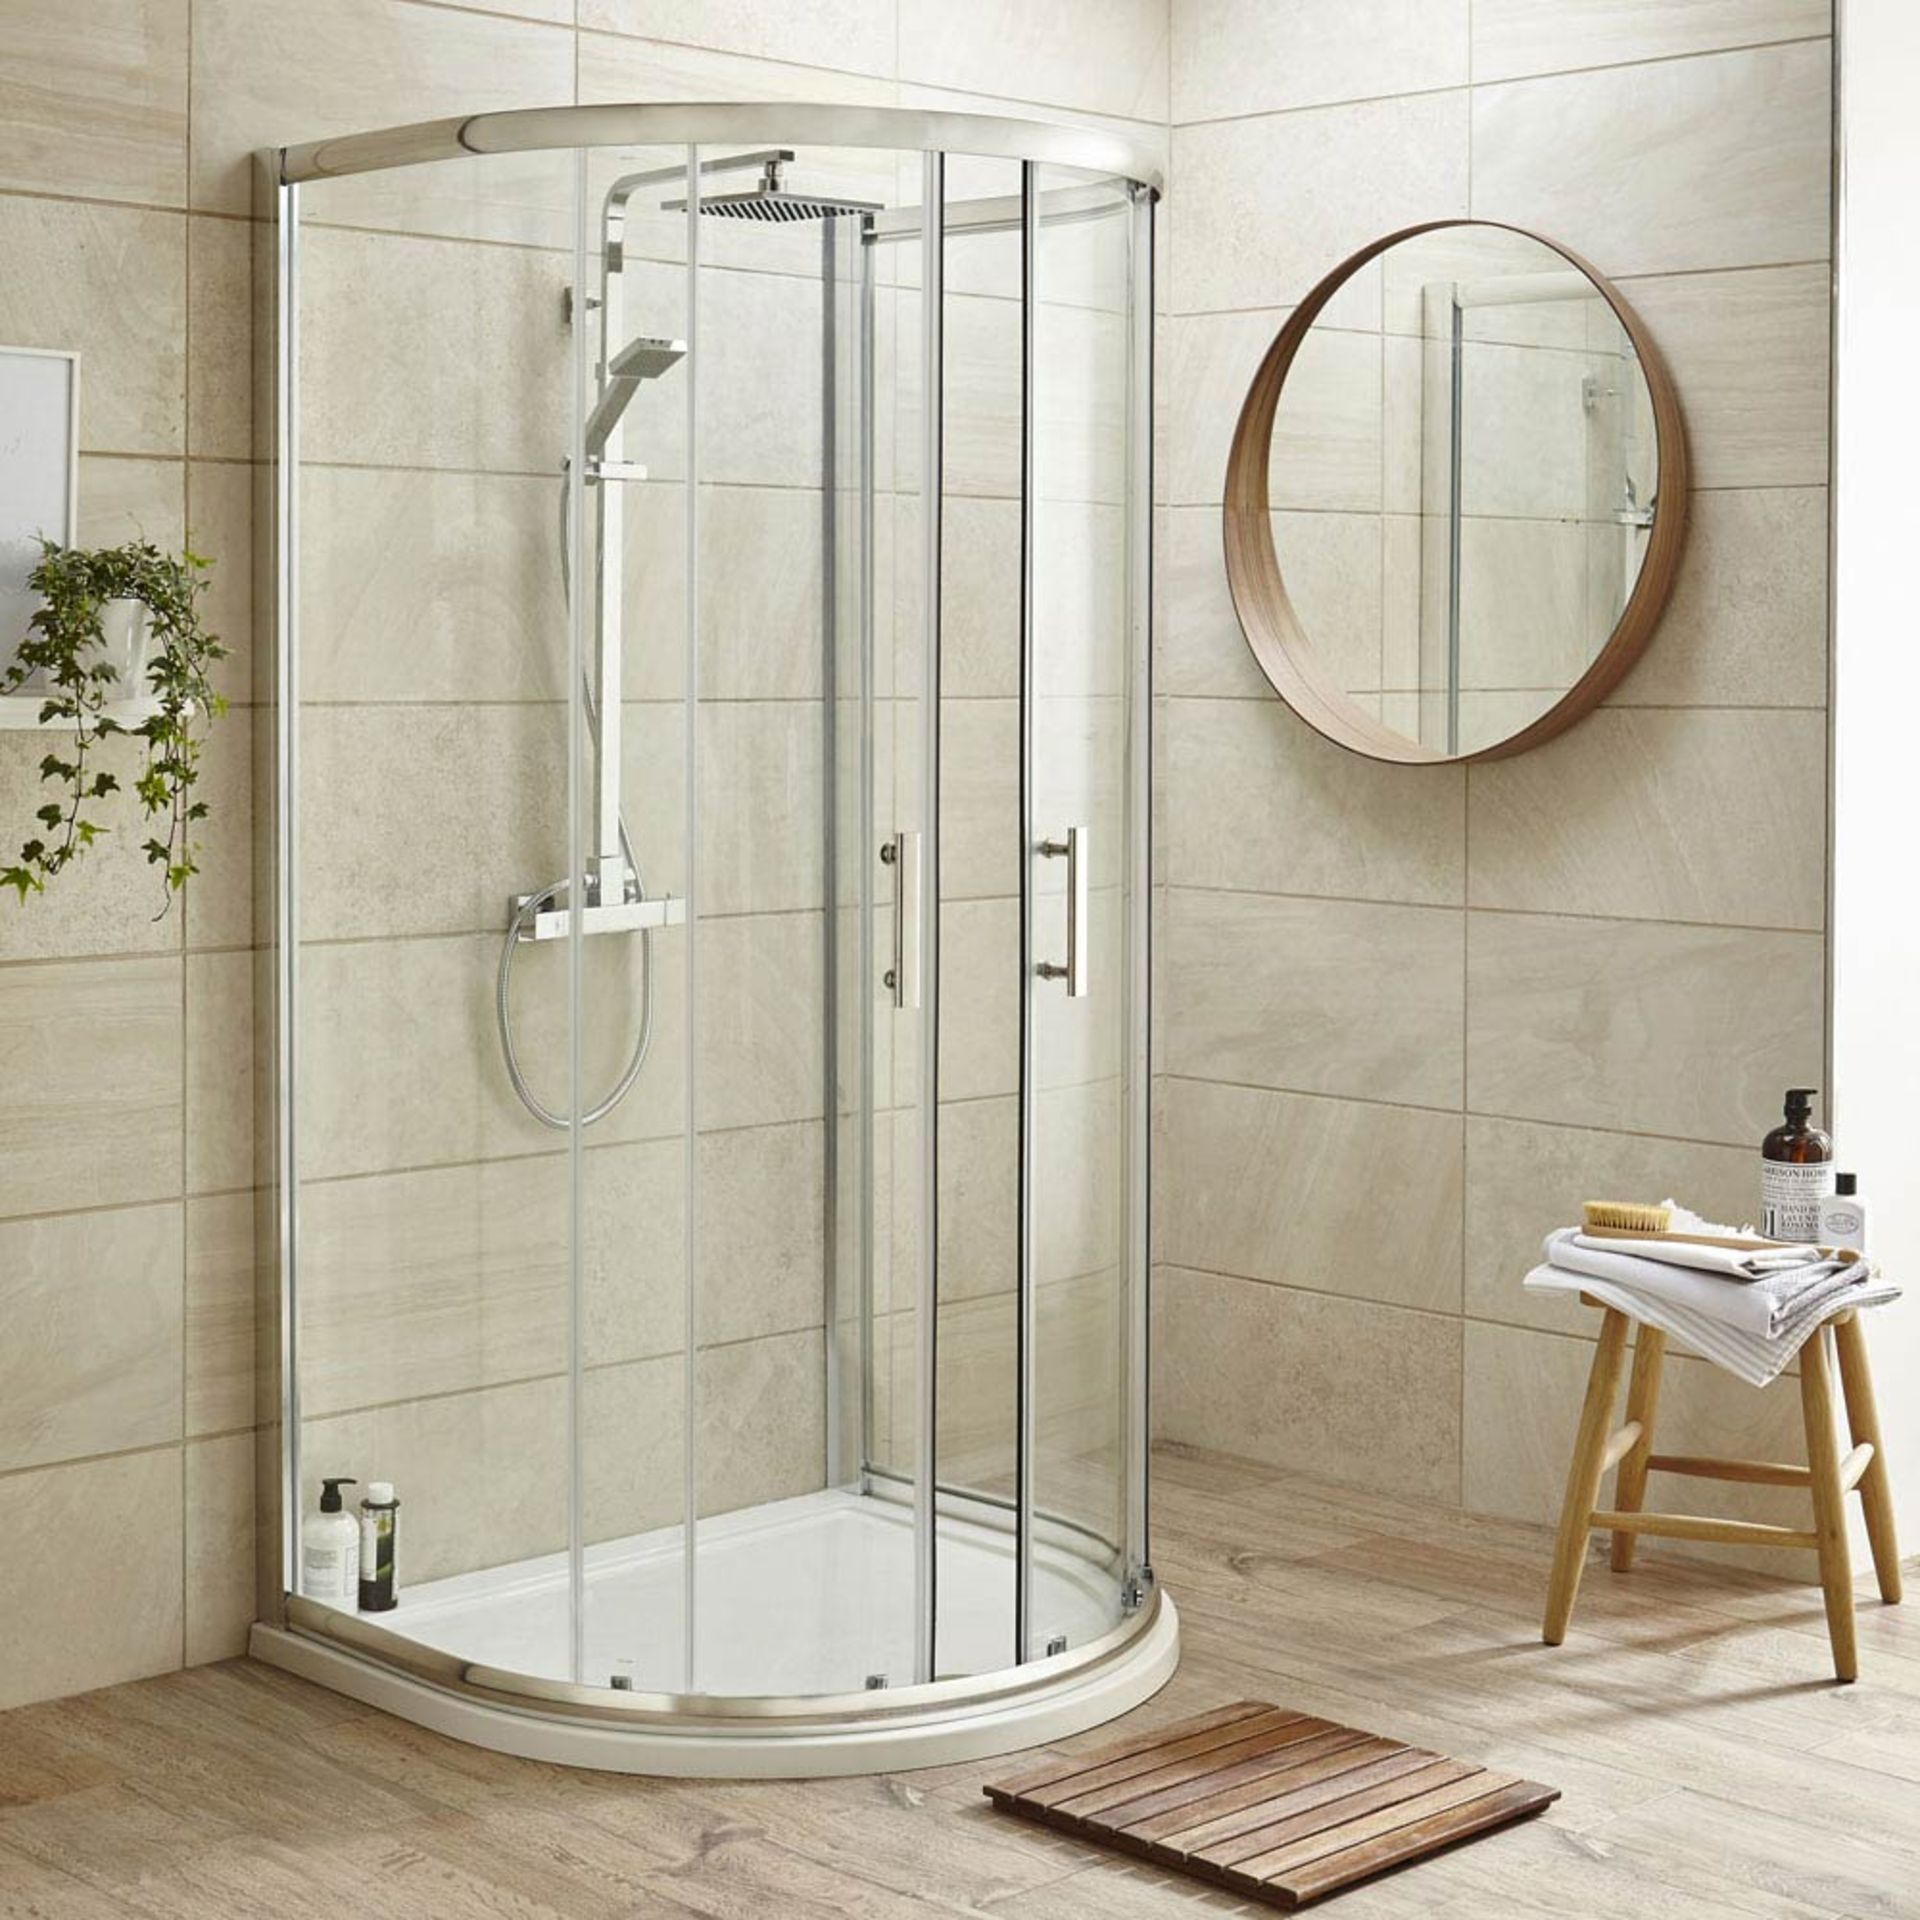 (PC41) Twyfords 770mm Hydro D Shape White Shower tray.Low profile ultra slim design Gel coated ... - Image 3 of 3